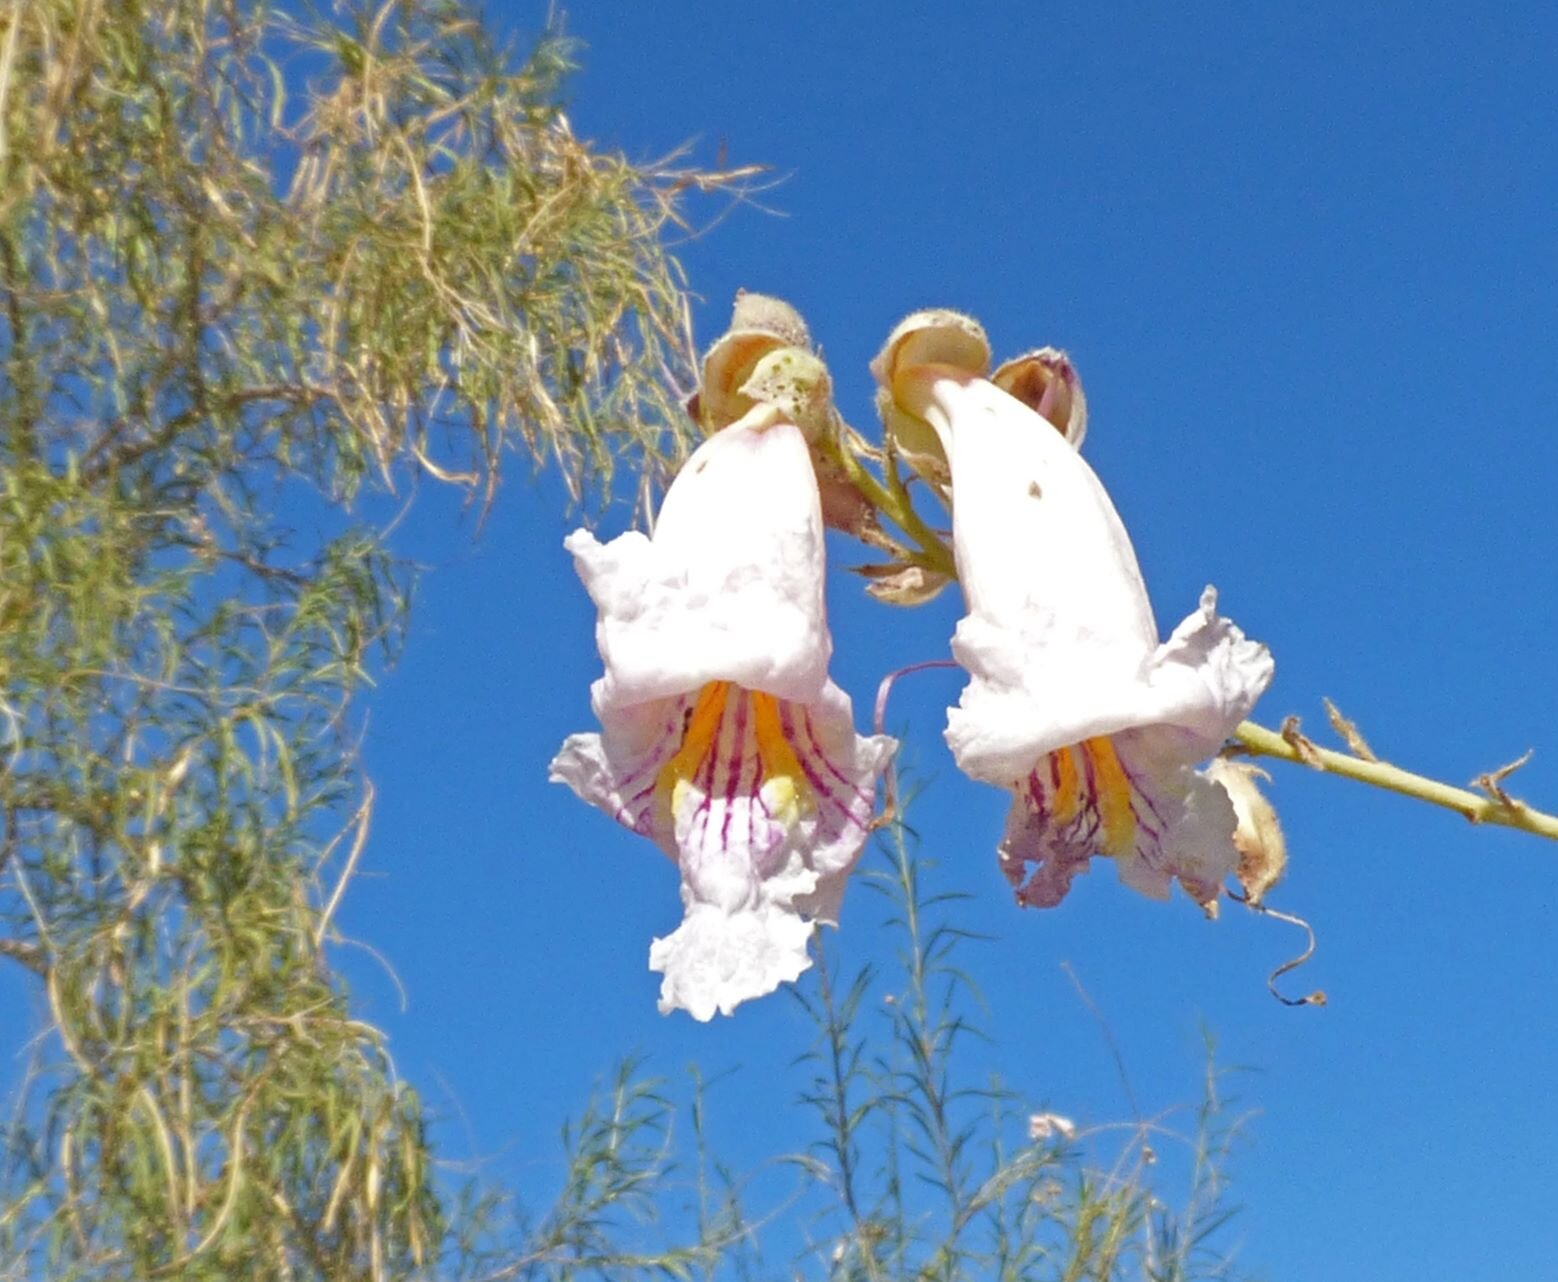 but the surprise was a Desert Willow (Chilopsis linearis),